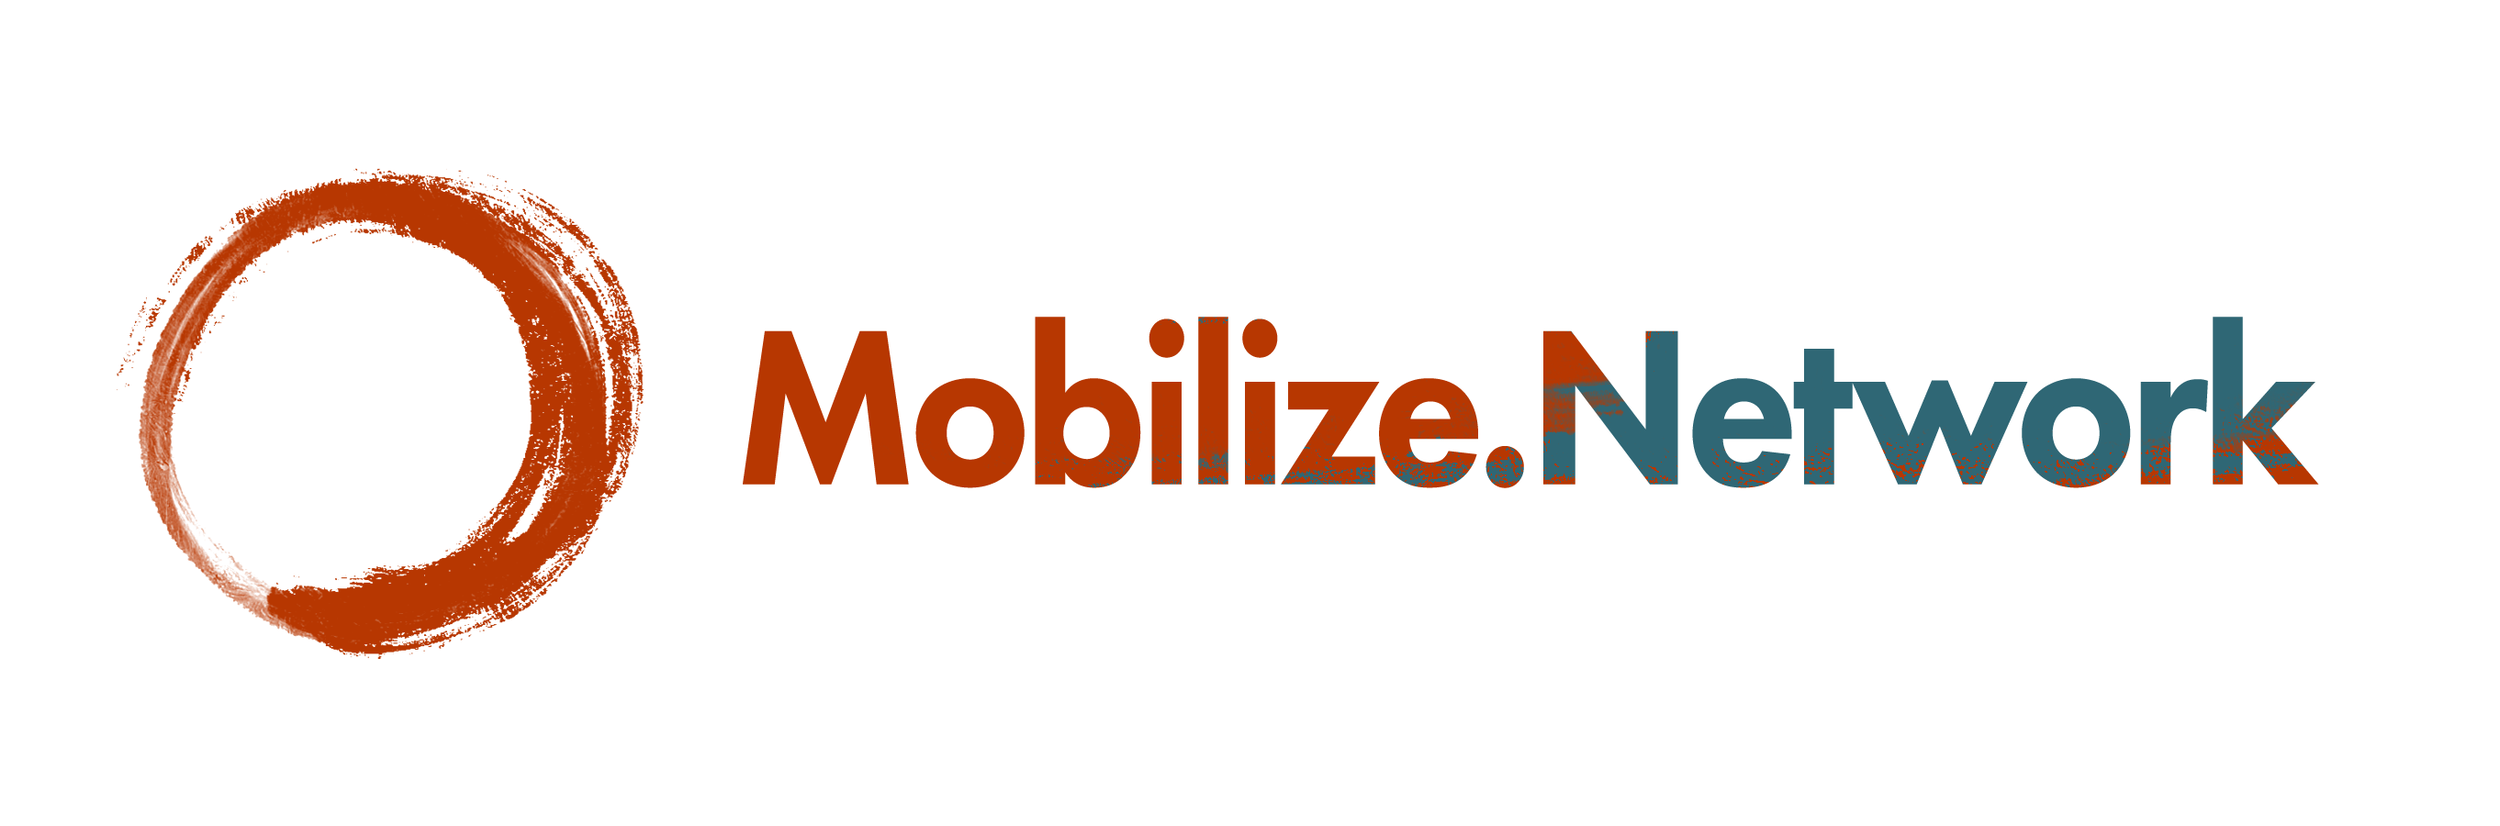 Mobilize.Network